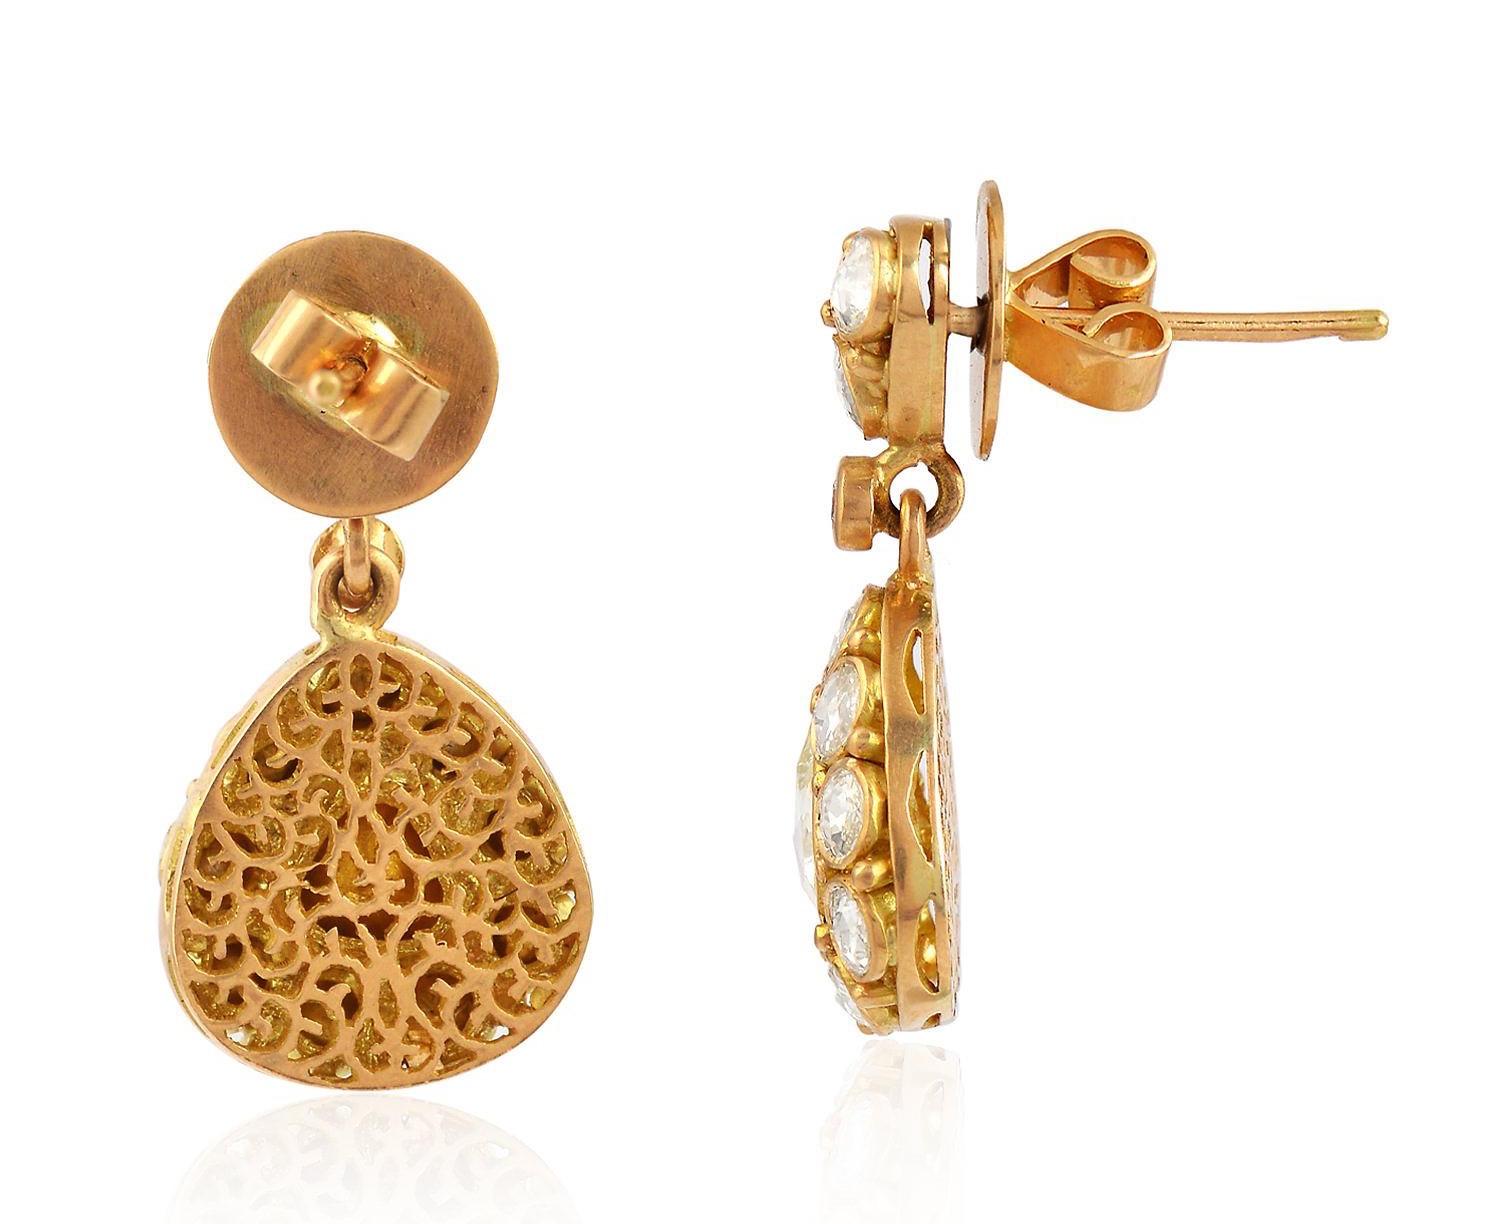 This vintage inspired drop earrings is intricately cast from 18-karat yellow gold, it's encrusted with 2.13-carats of gleaming rose cut diamonds

FOLLOW  MEGHNA JEWELS storefront to view the latest collection & exclusive pieces.  Meghna Jewels is